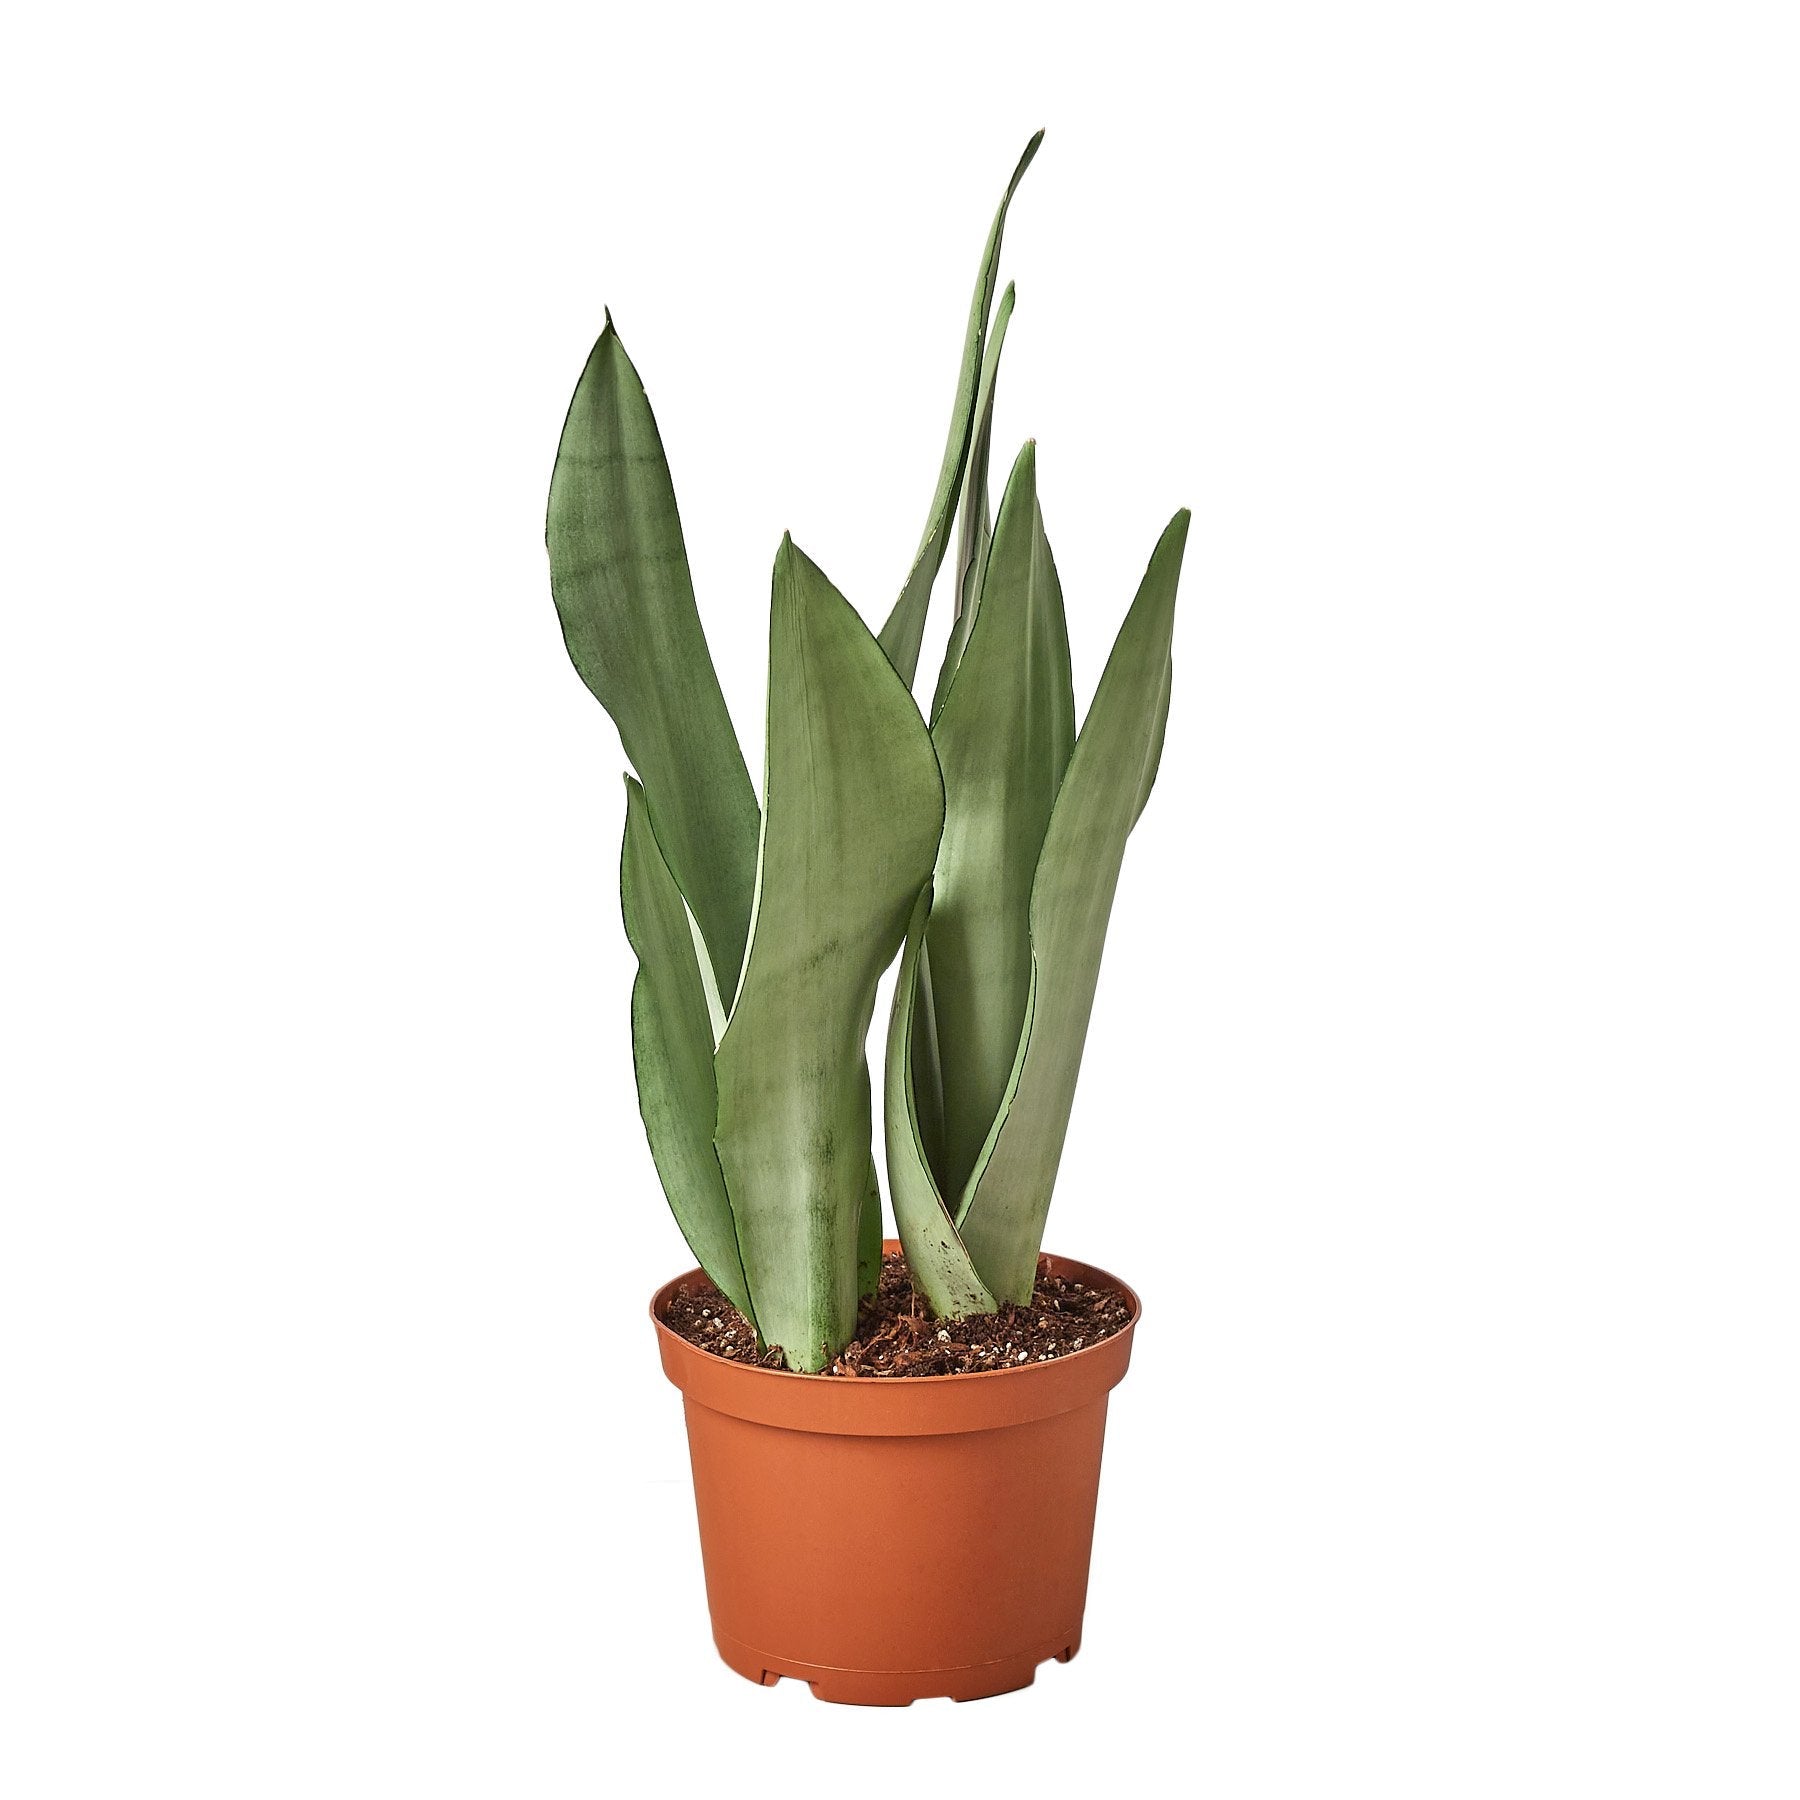 A plant in a brown pot on a white background at a plant nursery near me.